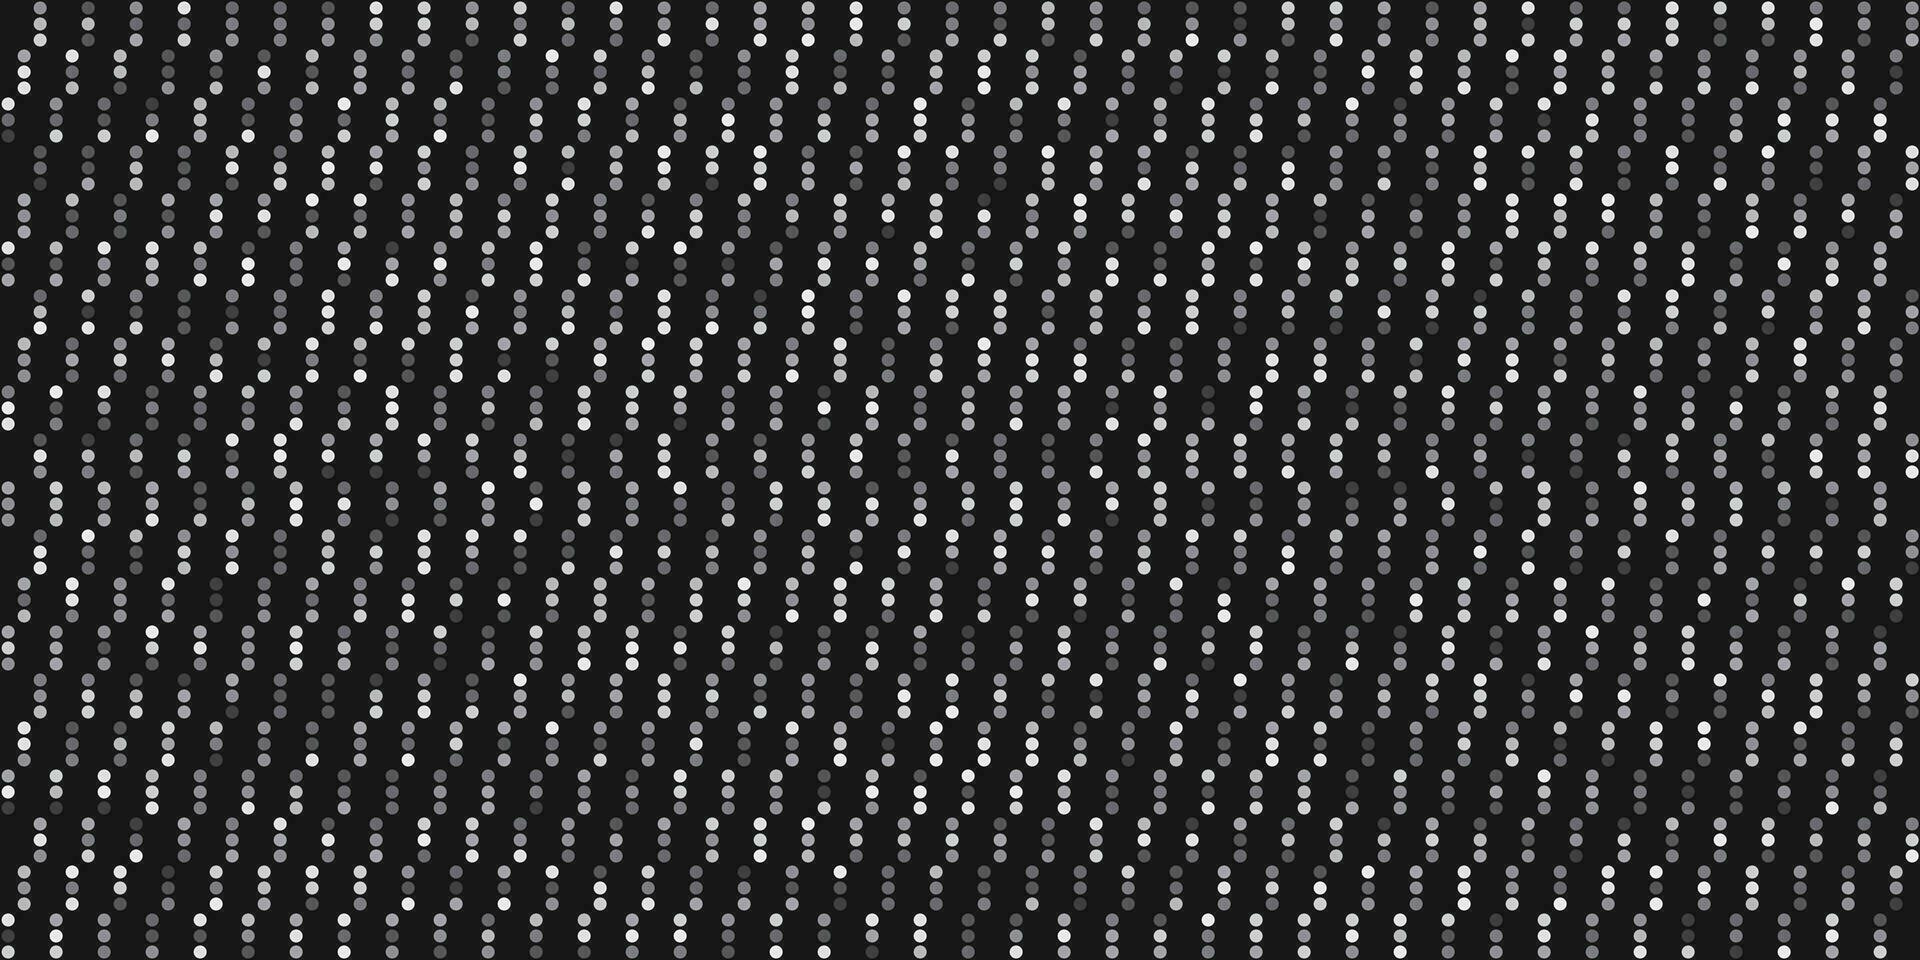 Black and white abstract background Polka dot pattern vector